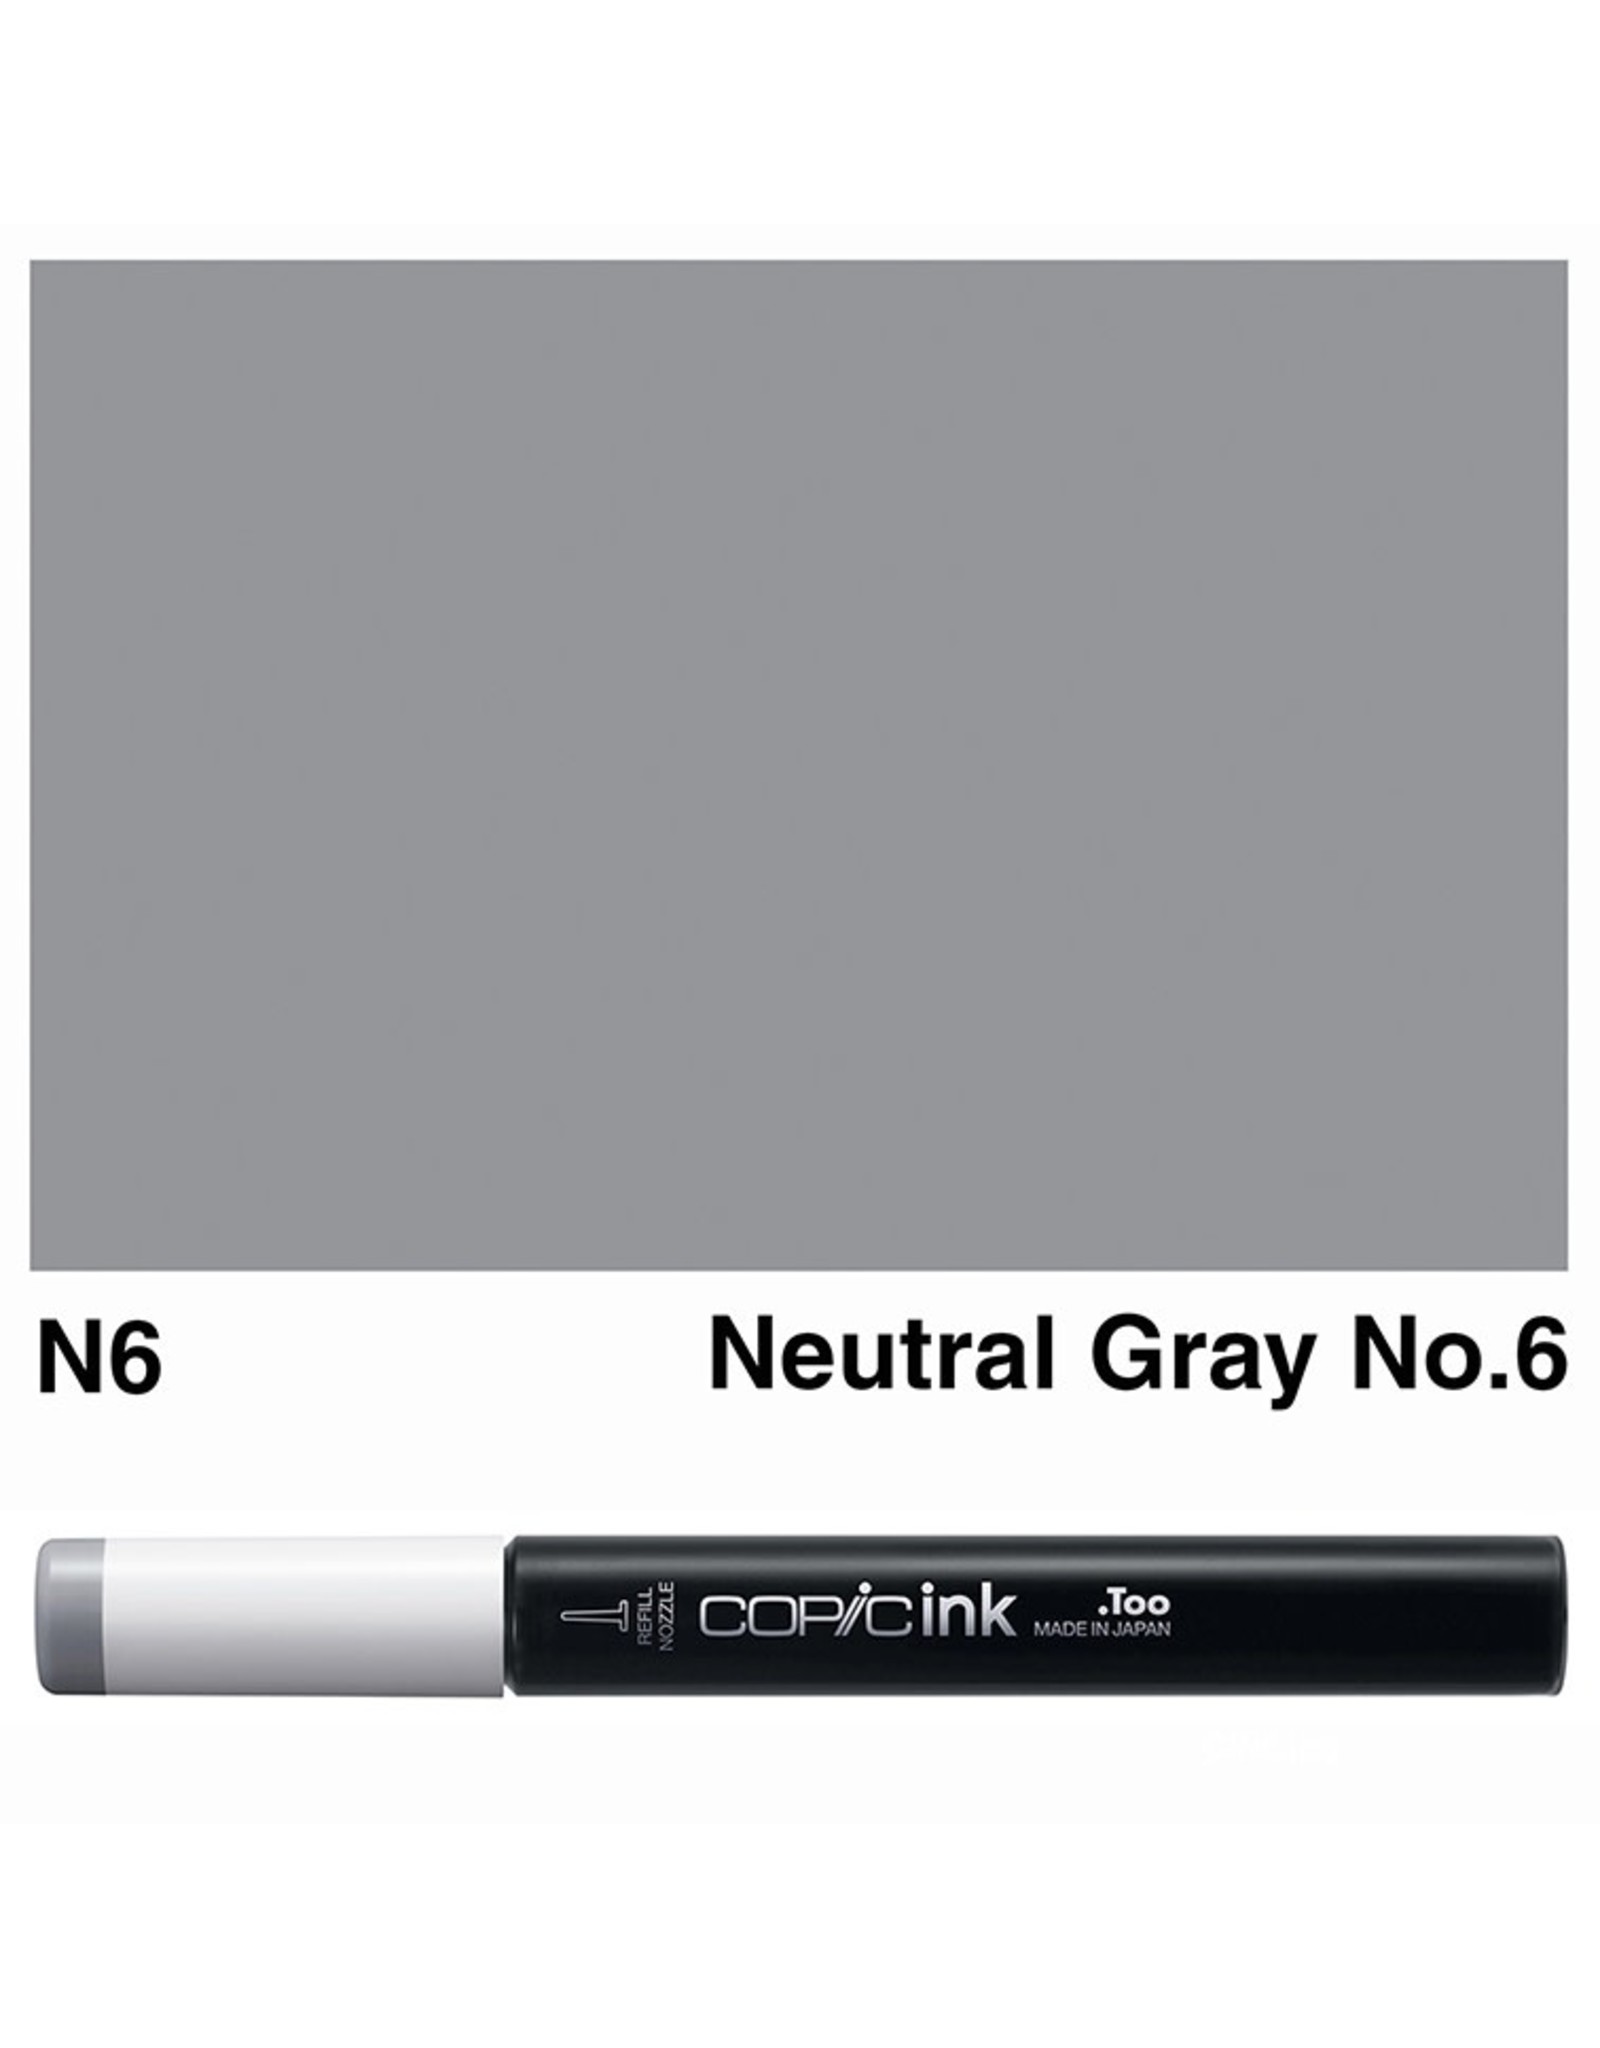 COPIC COPIC N6 NEUTRAL GRAY #6 REFILL